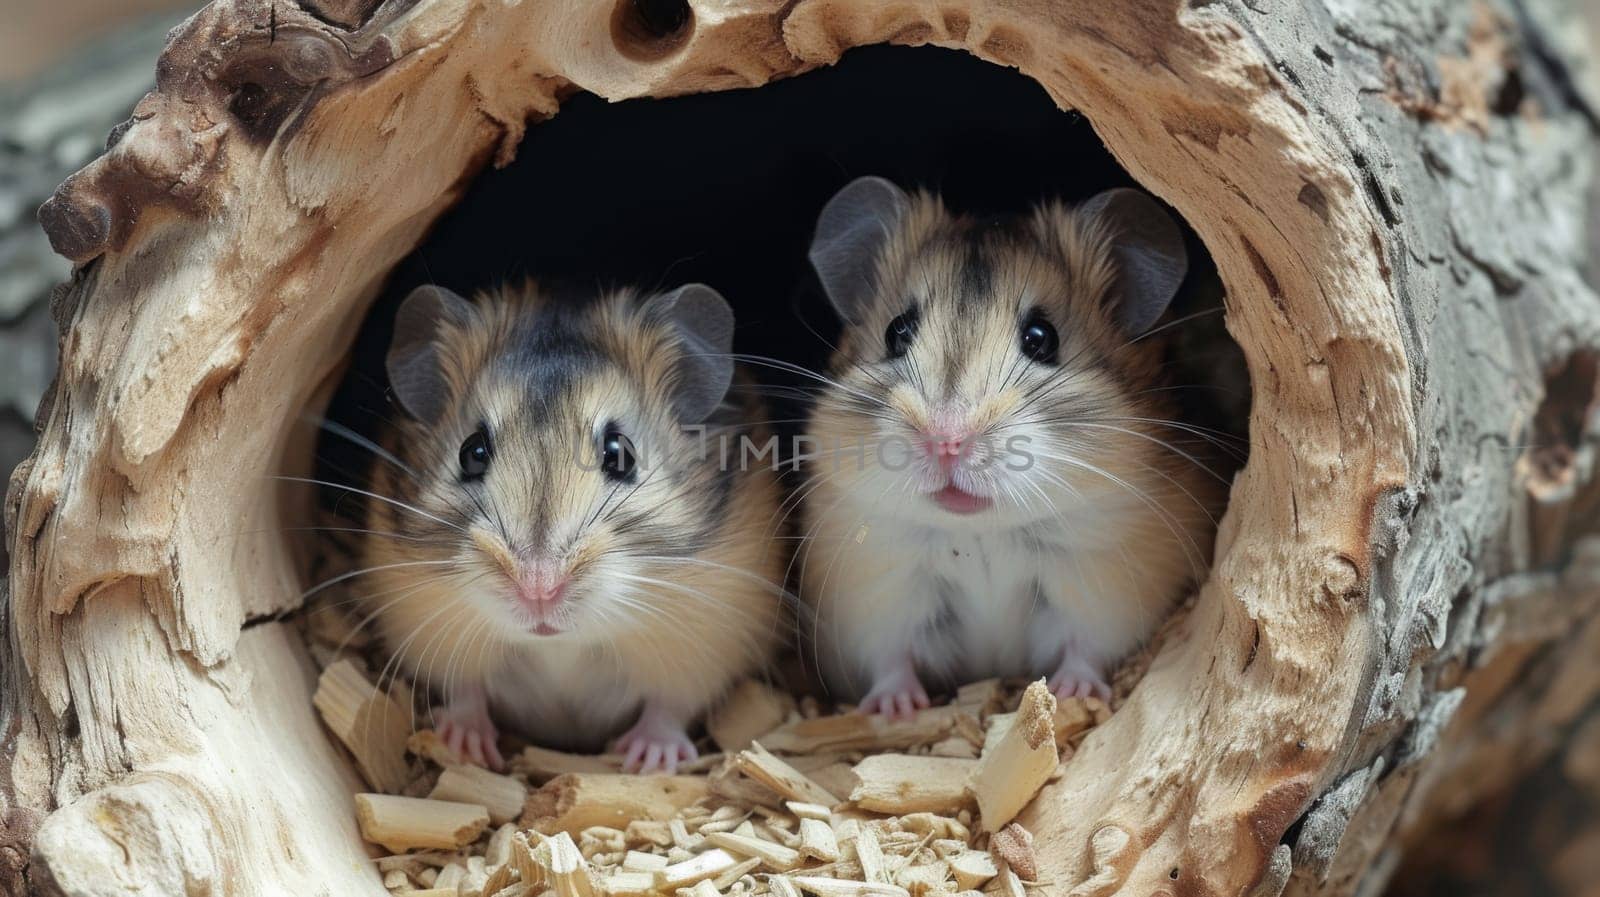 Two small rodents are sitting in a hollow log